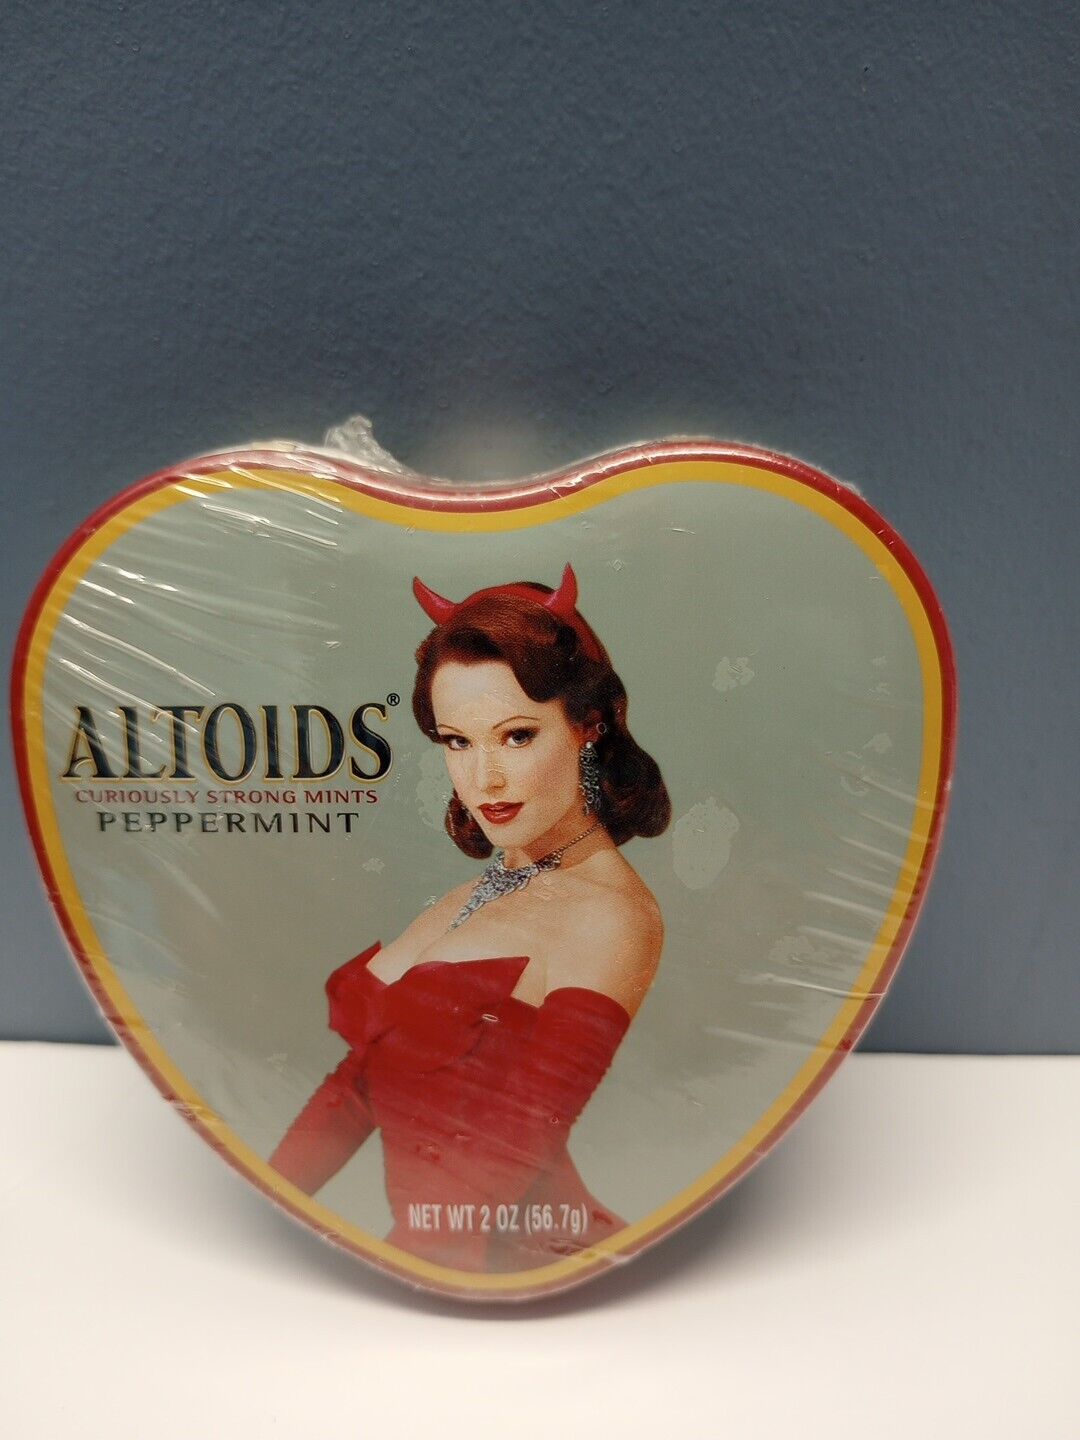 NEW Limited edition ALTOIDS heart tin SINDY valentines PIN UP devil horns GIRL